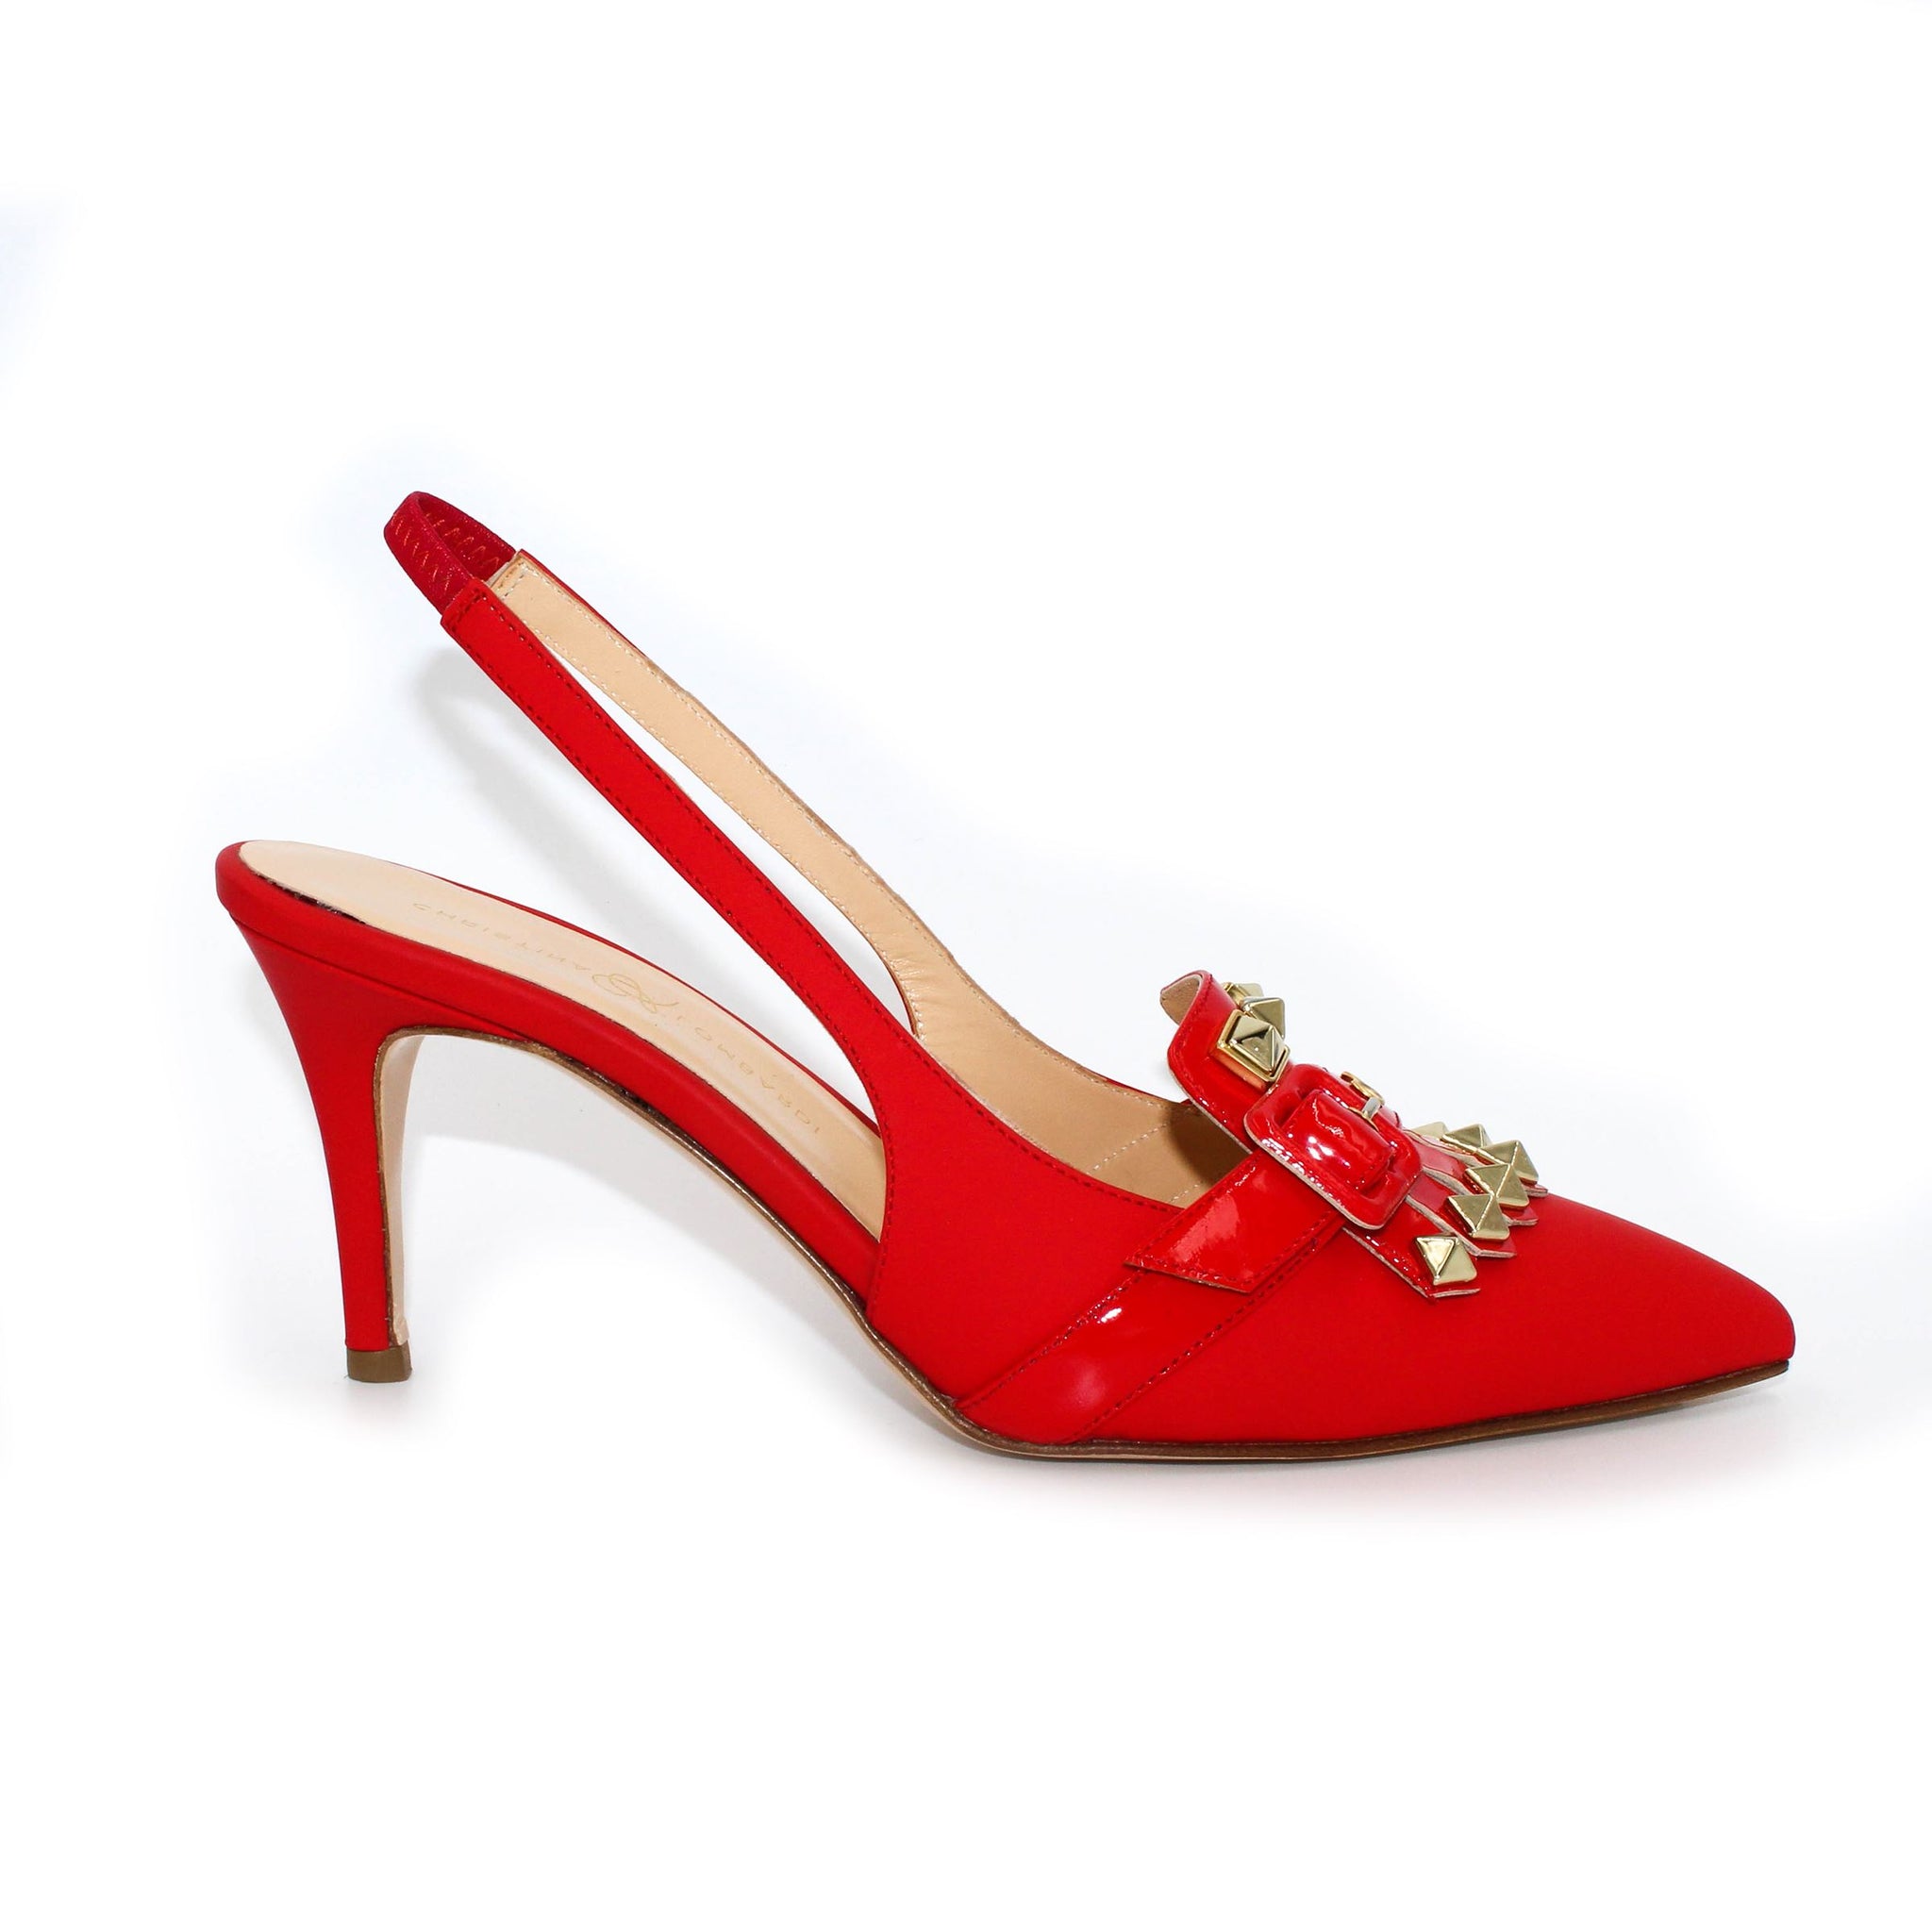 Christina Lombardi | Luxury Shoes & Handbags Hand-Crafted in Italy